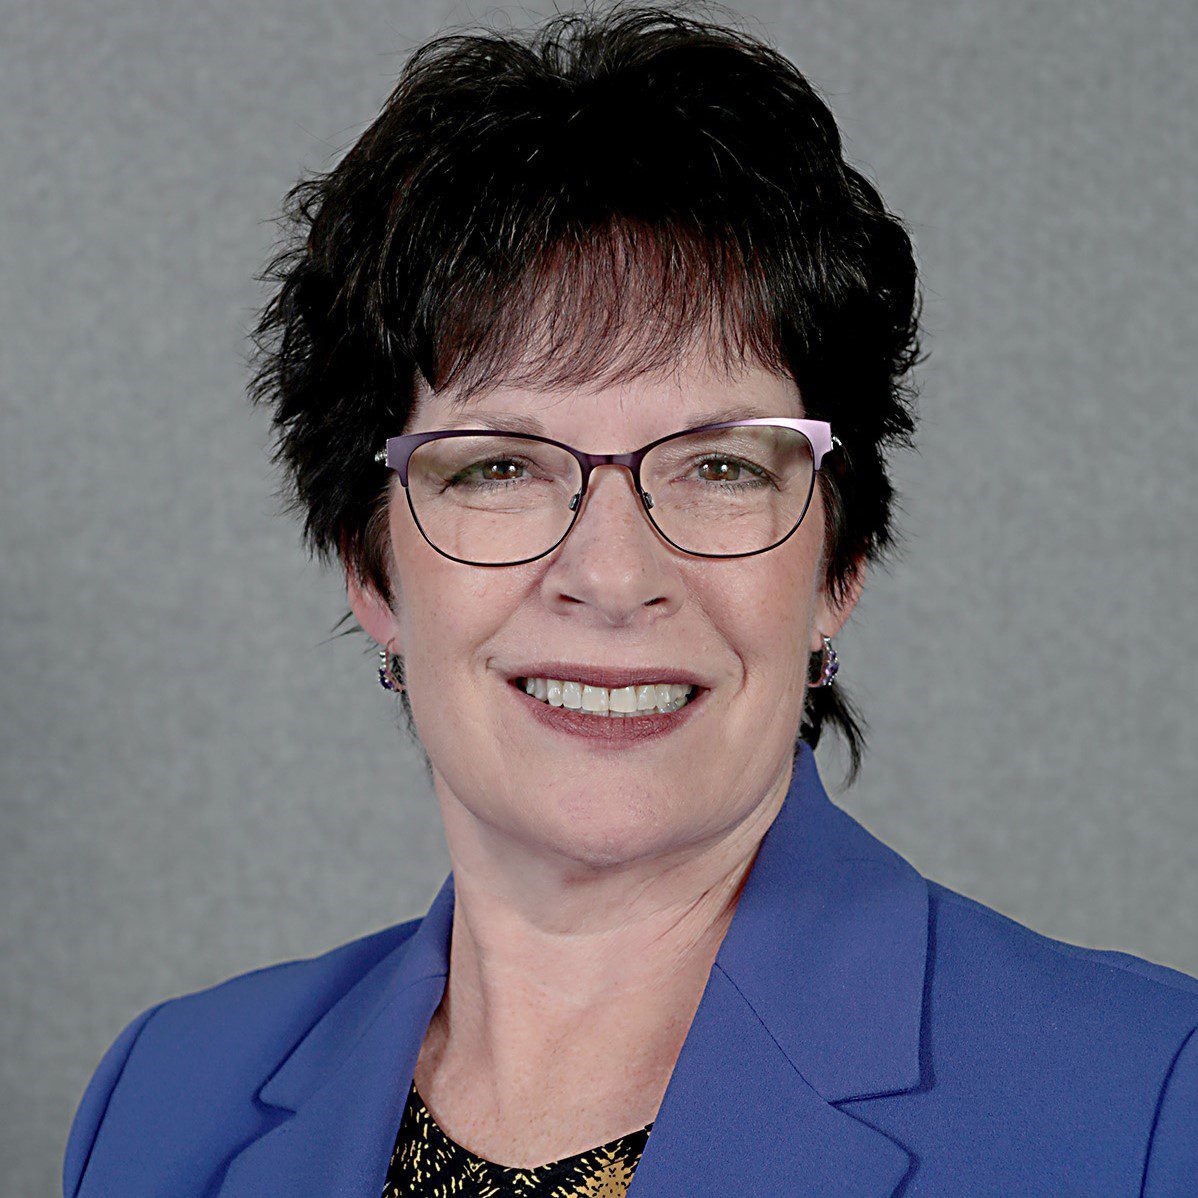 A headshot of woman with dark hair, glasses, and a blue suit jacket